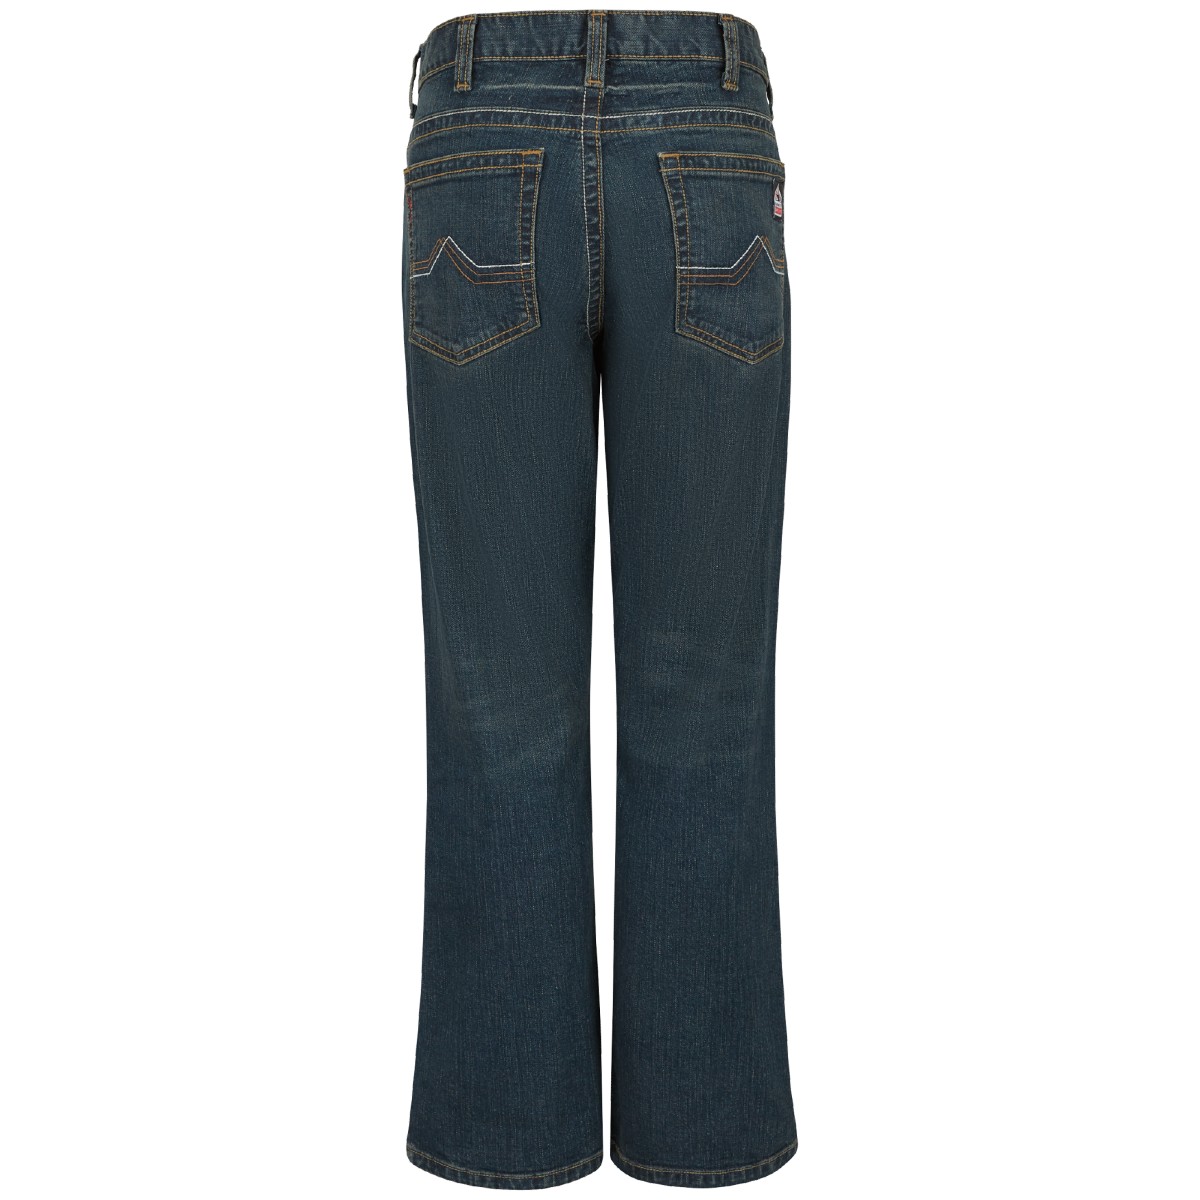 Bulwark Men’s Relaxed Fit Bootcut Jean with Stretch in Denim